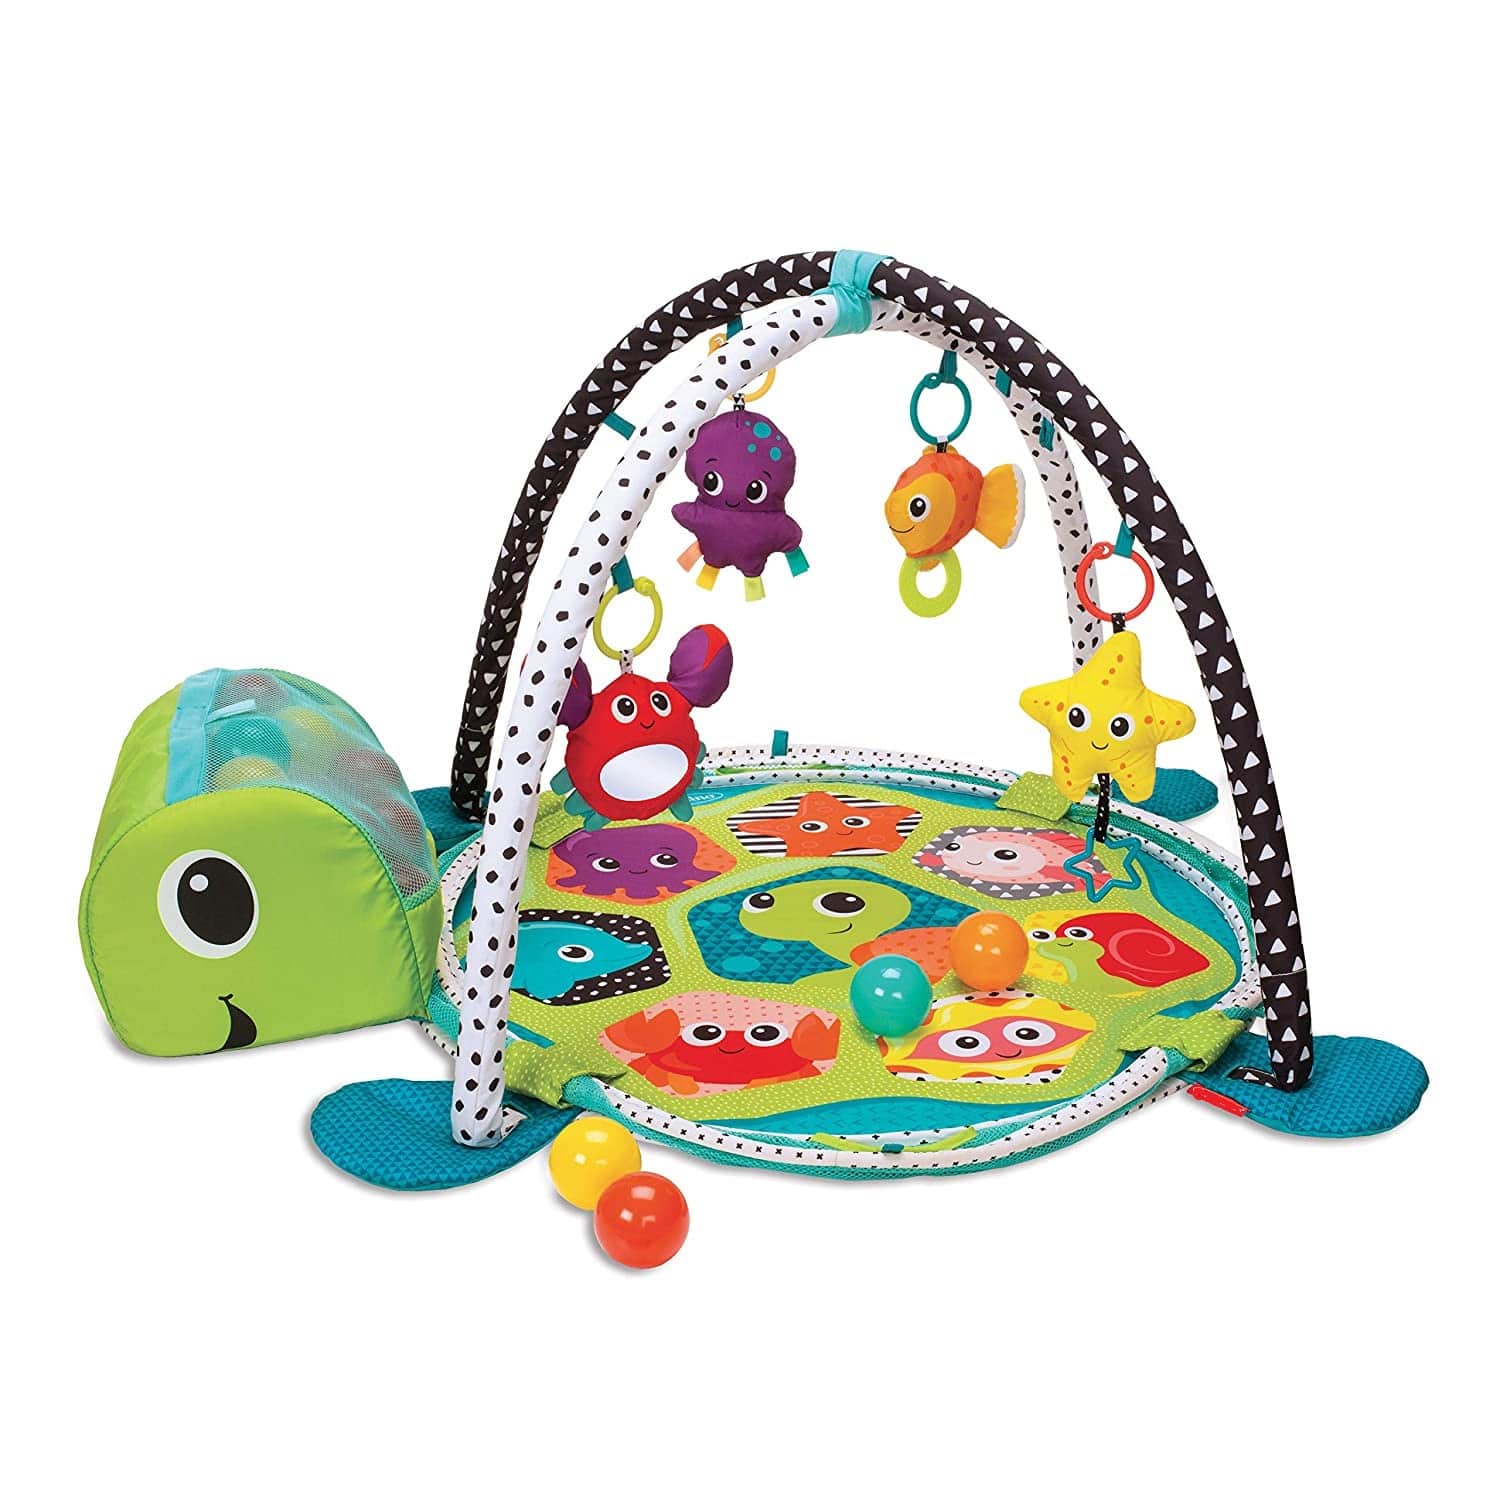 Little Angel 3in1 Baby Activity gym with ball pit Hippo